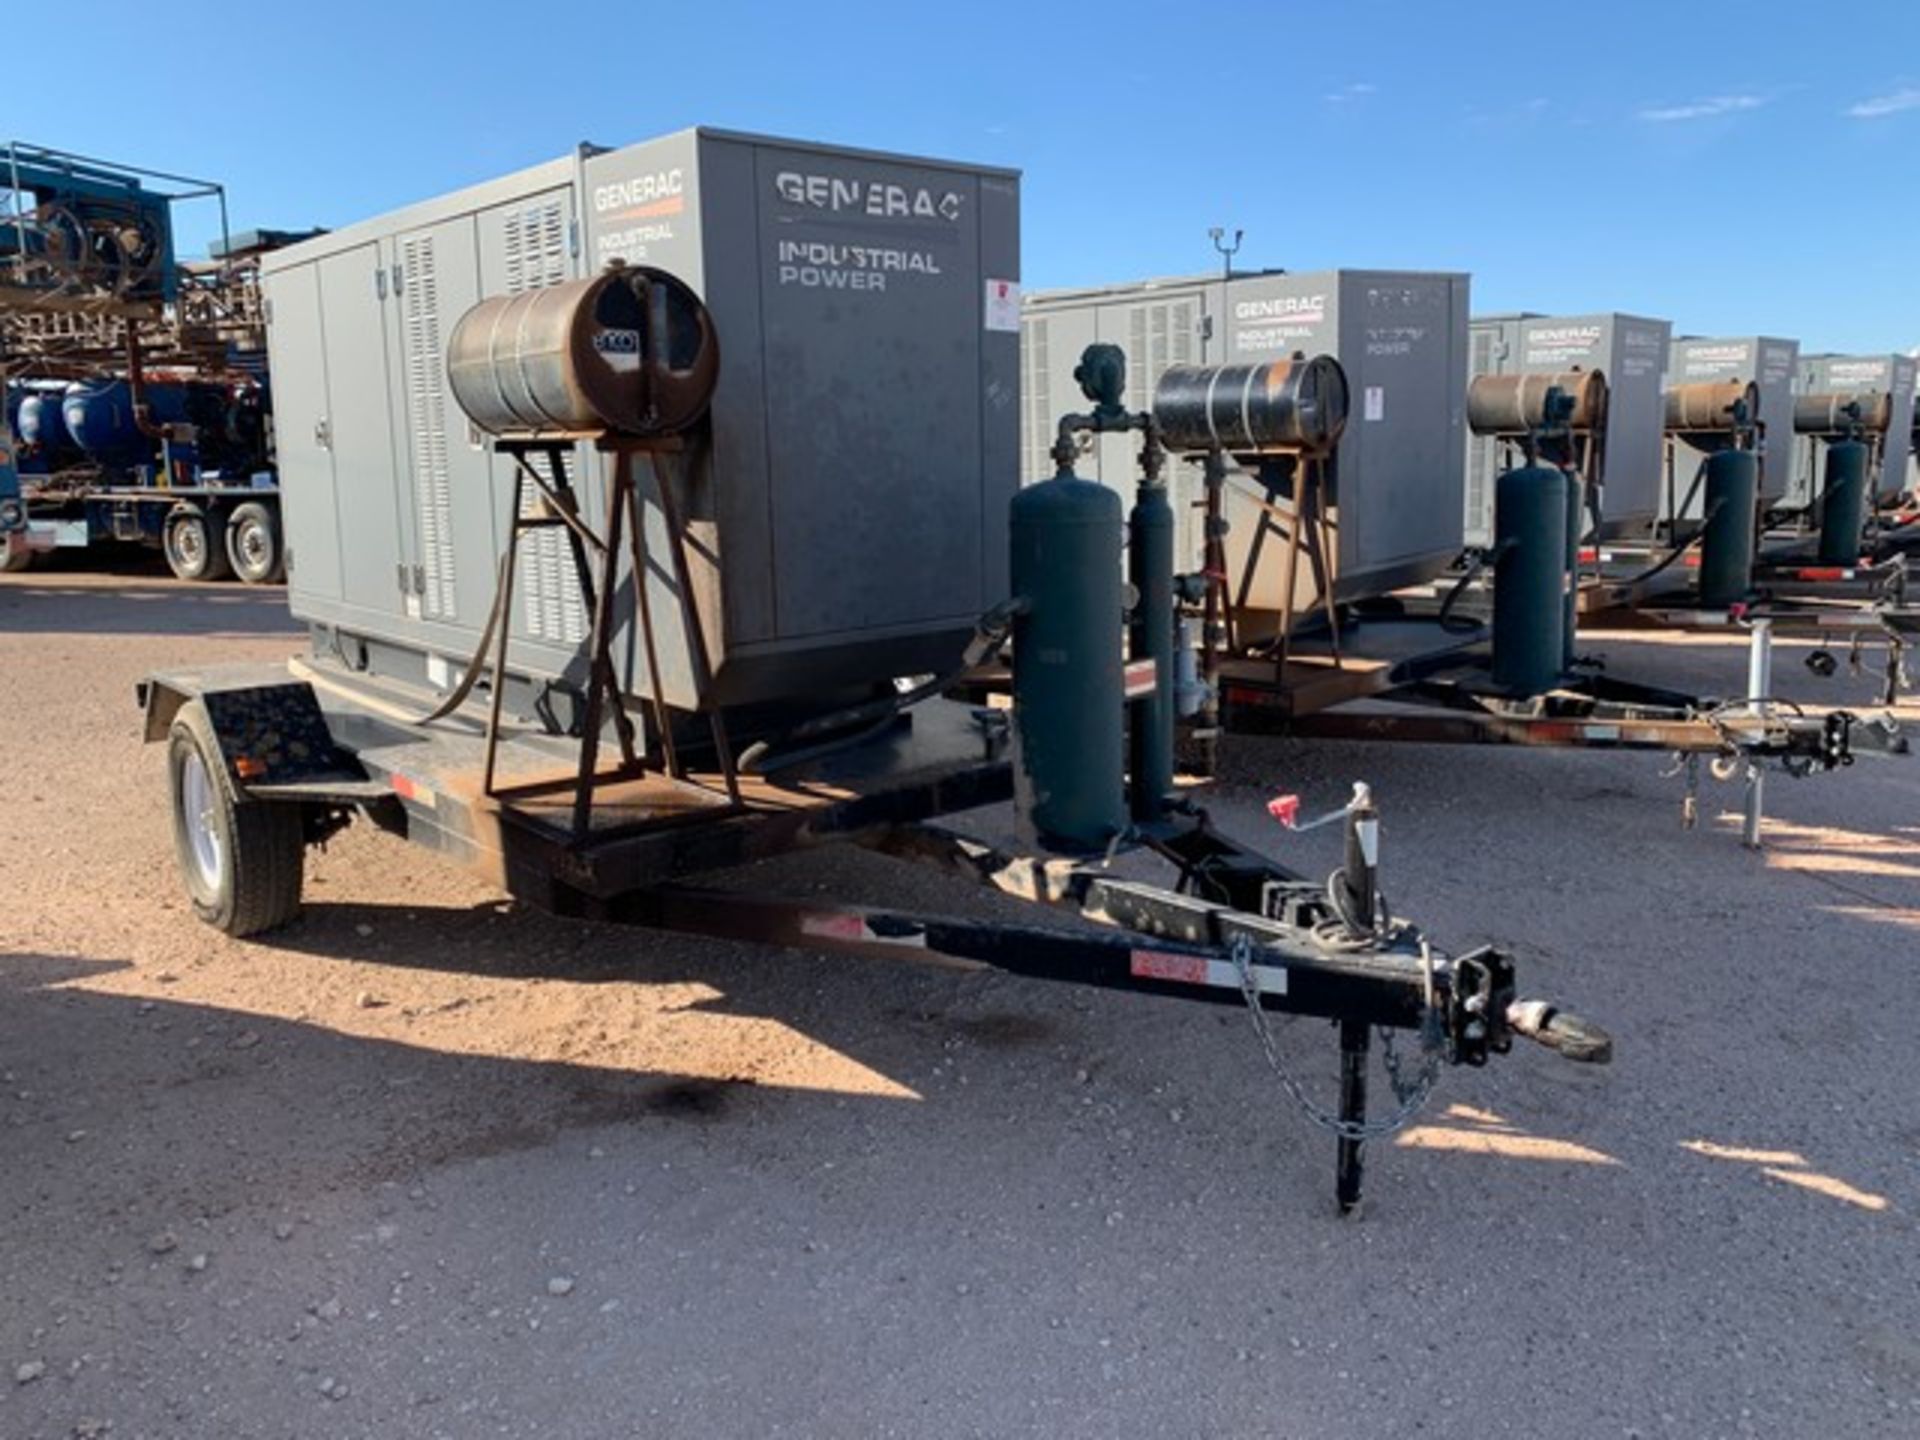 Located in YARD 1 - Midland, TX (2937) 2013 GENERAC INDUSTRIAL POWER 130 KW, 277/480V 3 PHASE - Image 2 of 4